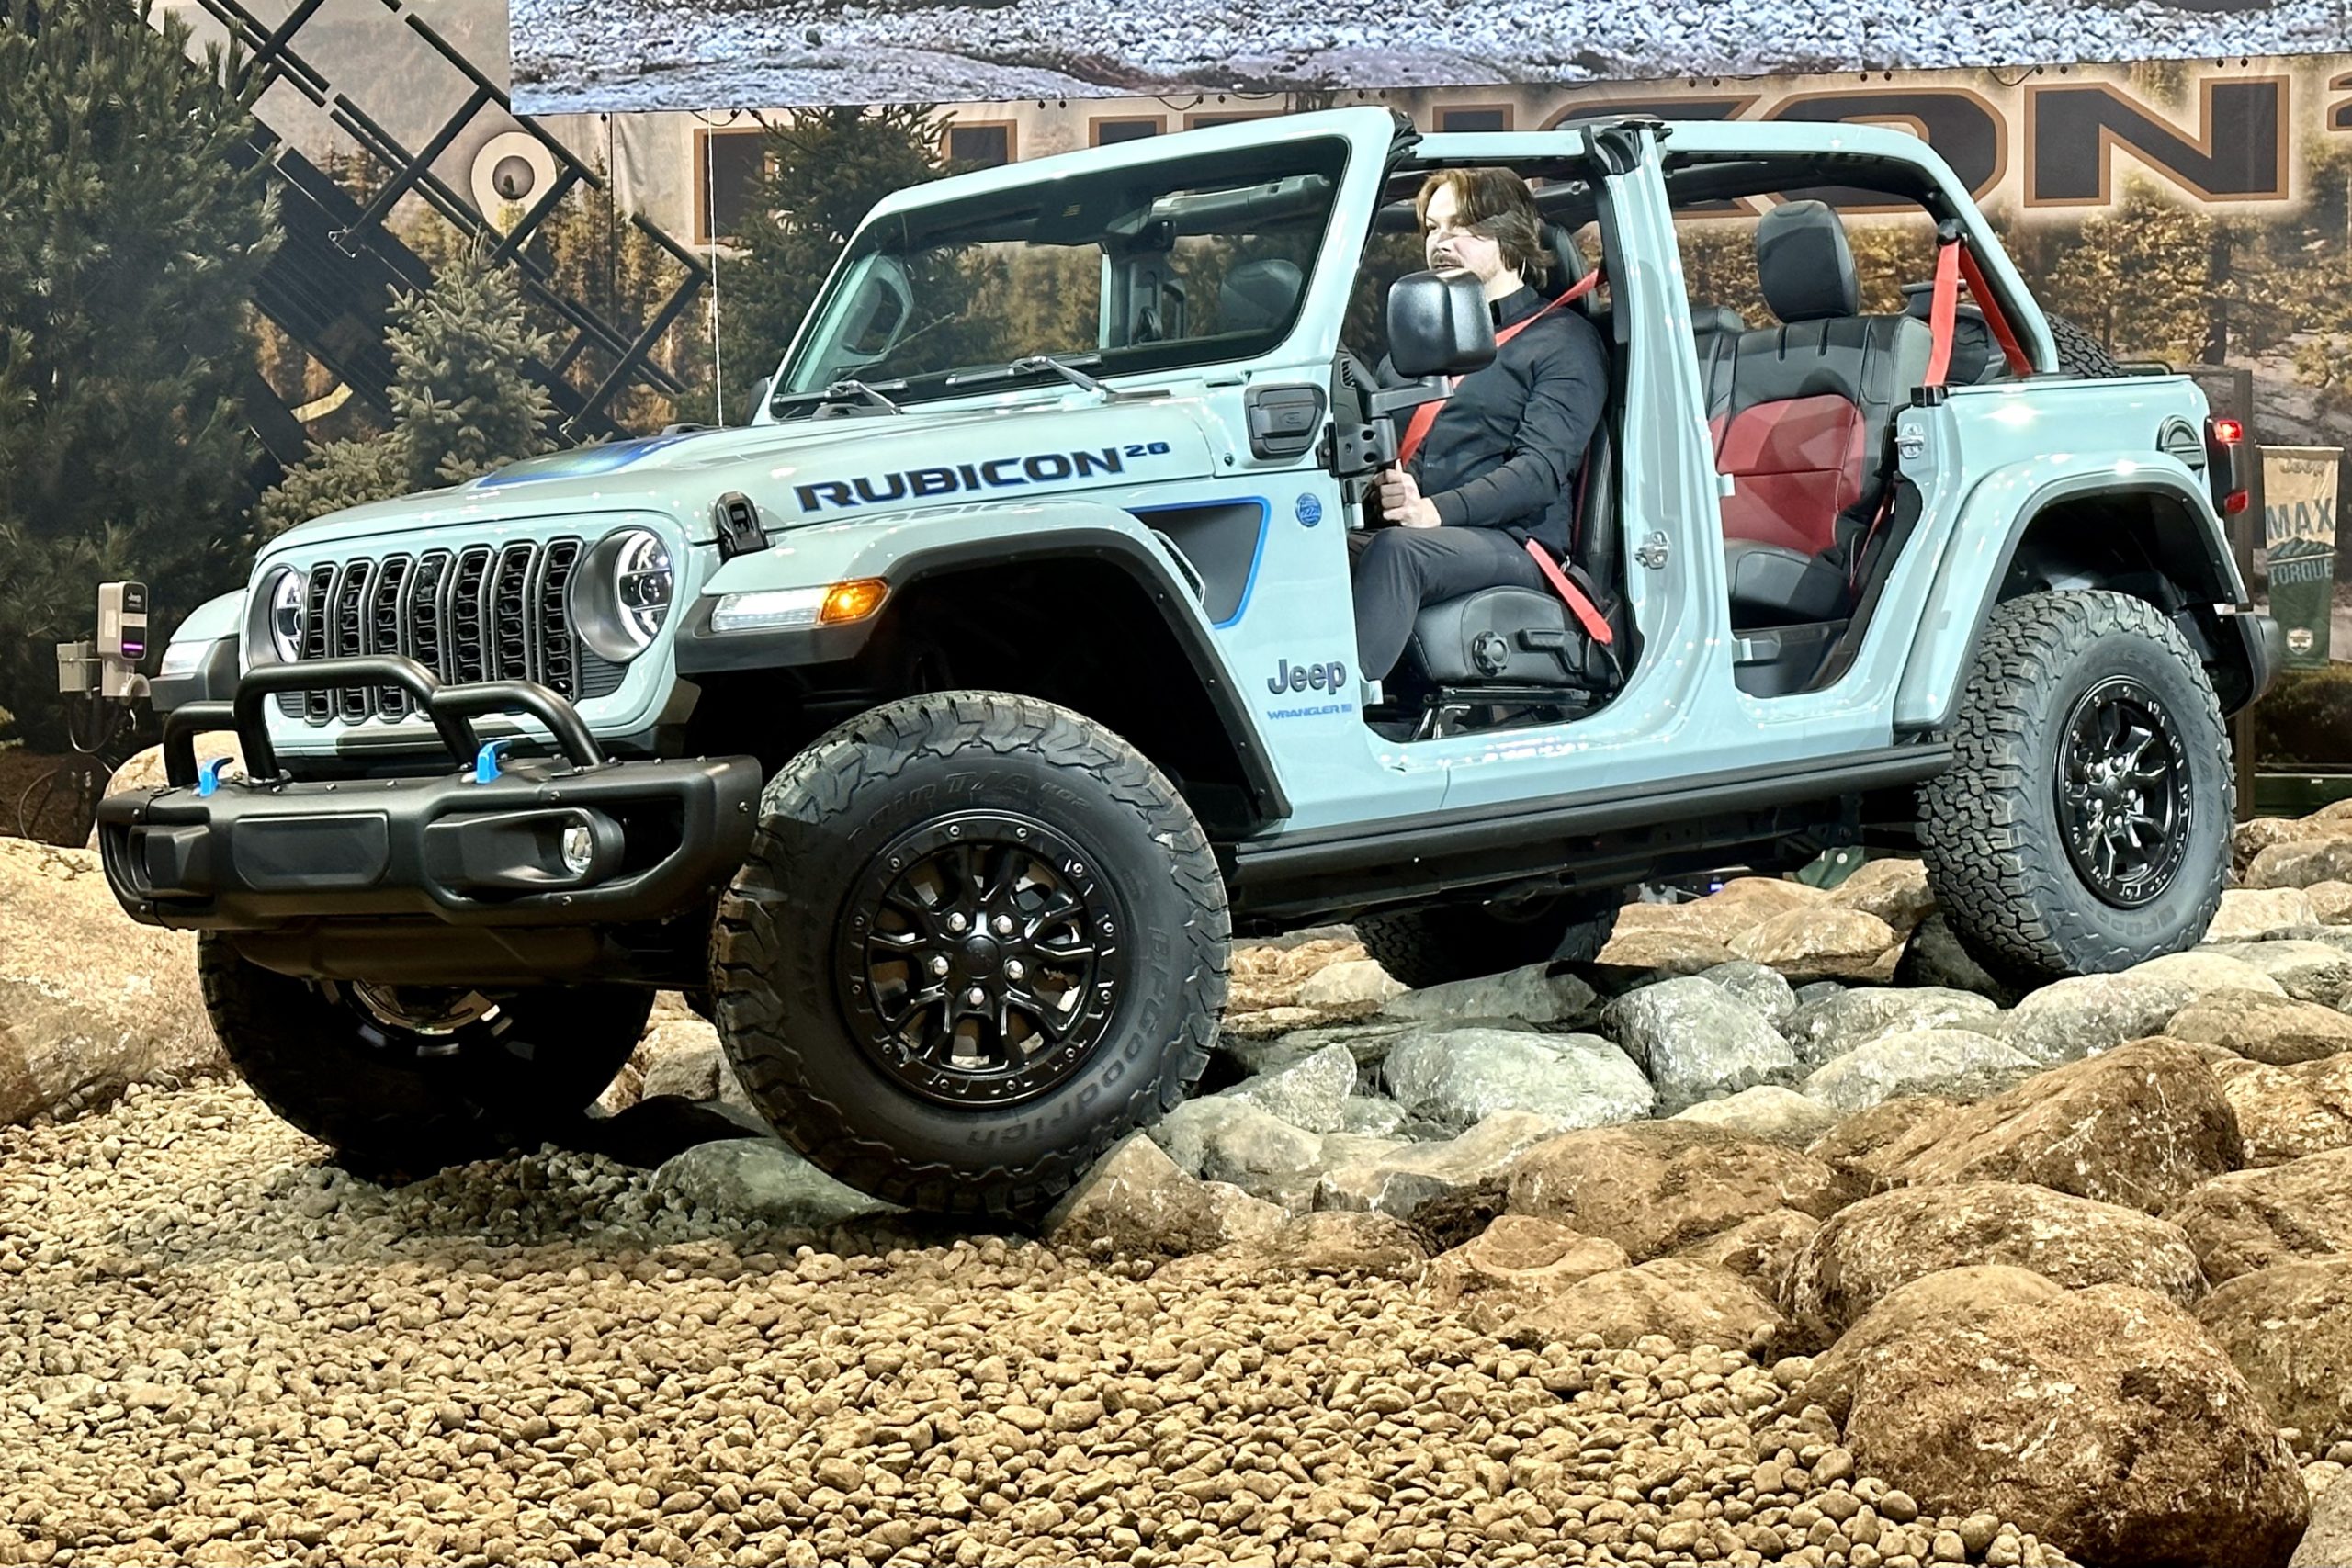 How to Choose the Best Hammock for Your Jeep Wrangler: An Expert